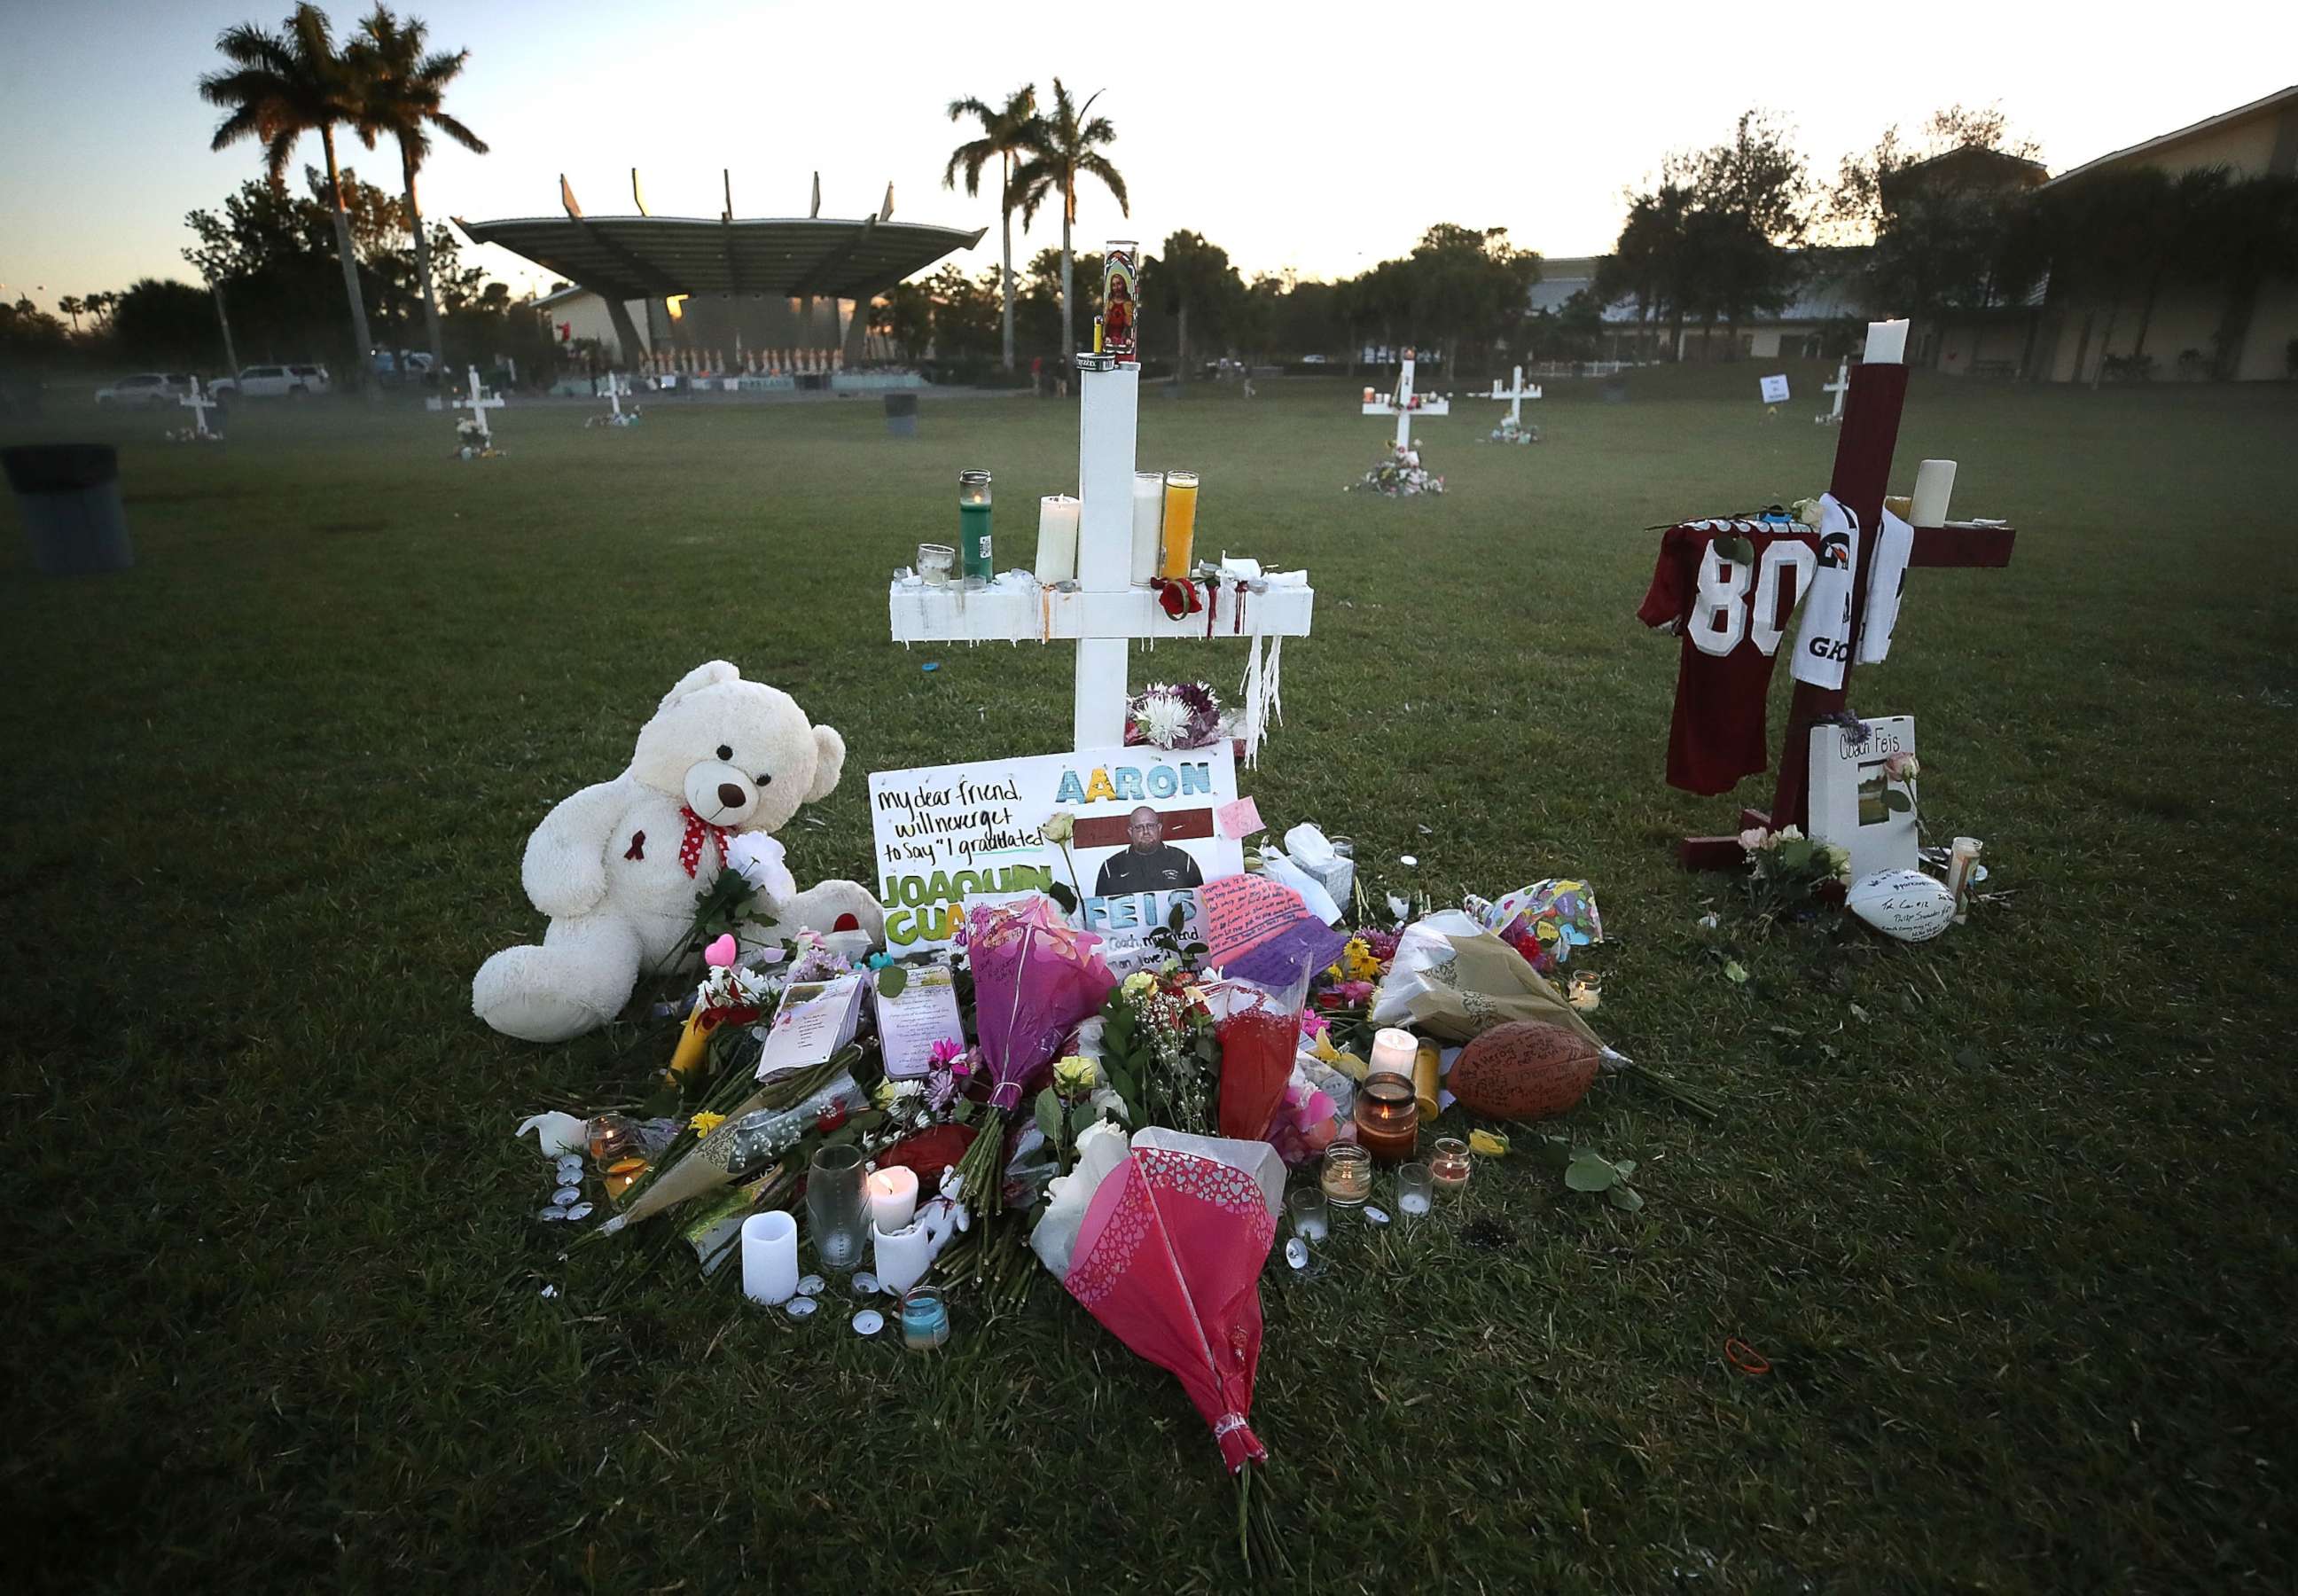 PHOTO: Flowers and mementos are placed on a memorial site, Feb. 17, 2018, for those killed mass shooting at Marjory Stoneman Douglas High School, in Parkland, Fla.